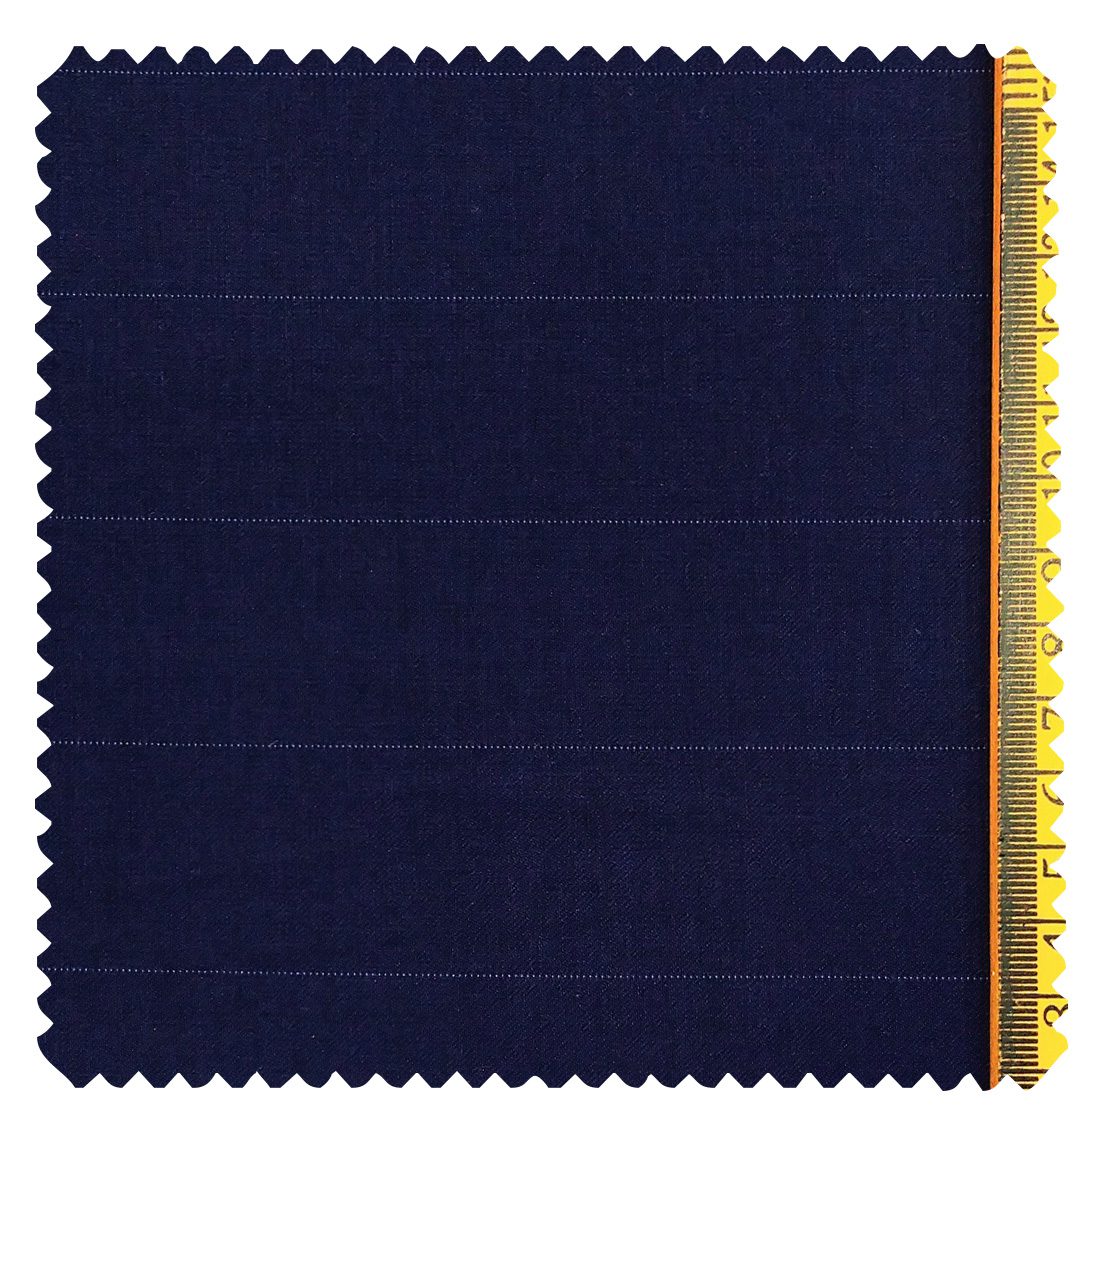 Cadini Italy Men's by Siyaram's Dark Royal Blue Exotic Terry Rayon Pin Stripes Unstitched Suiting Fabric - 3.75 Meter